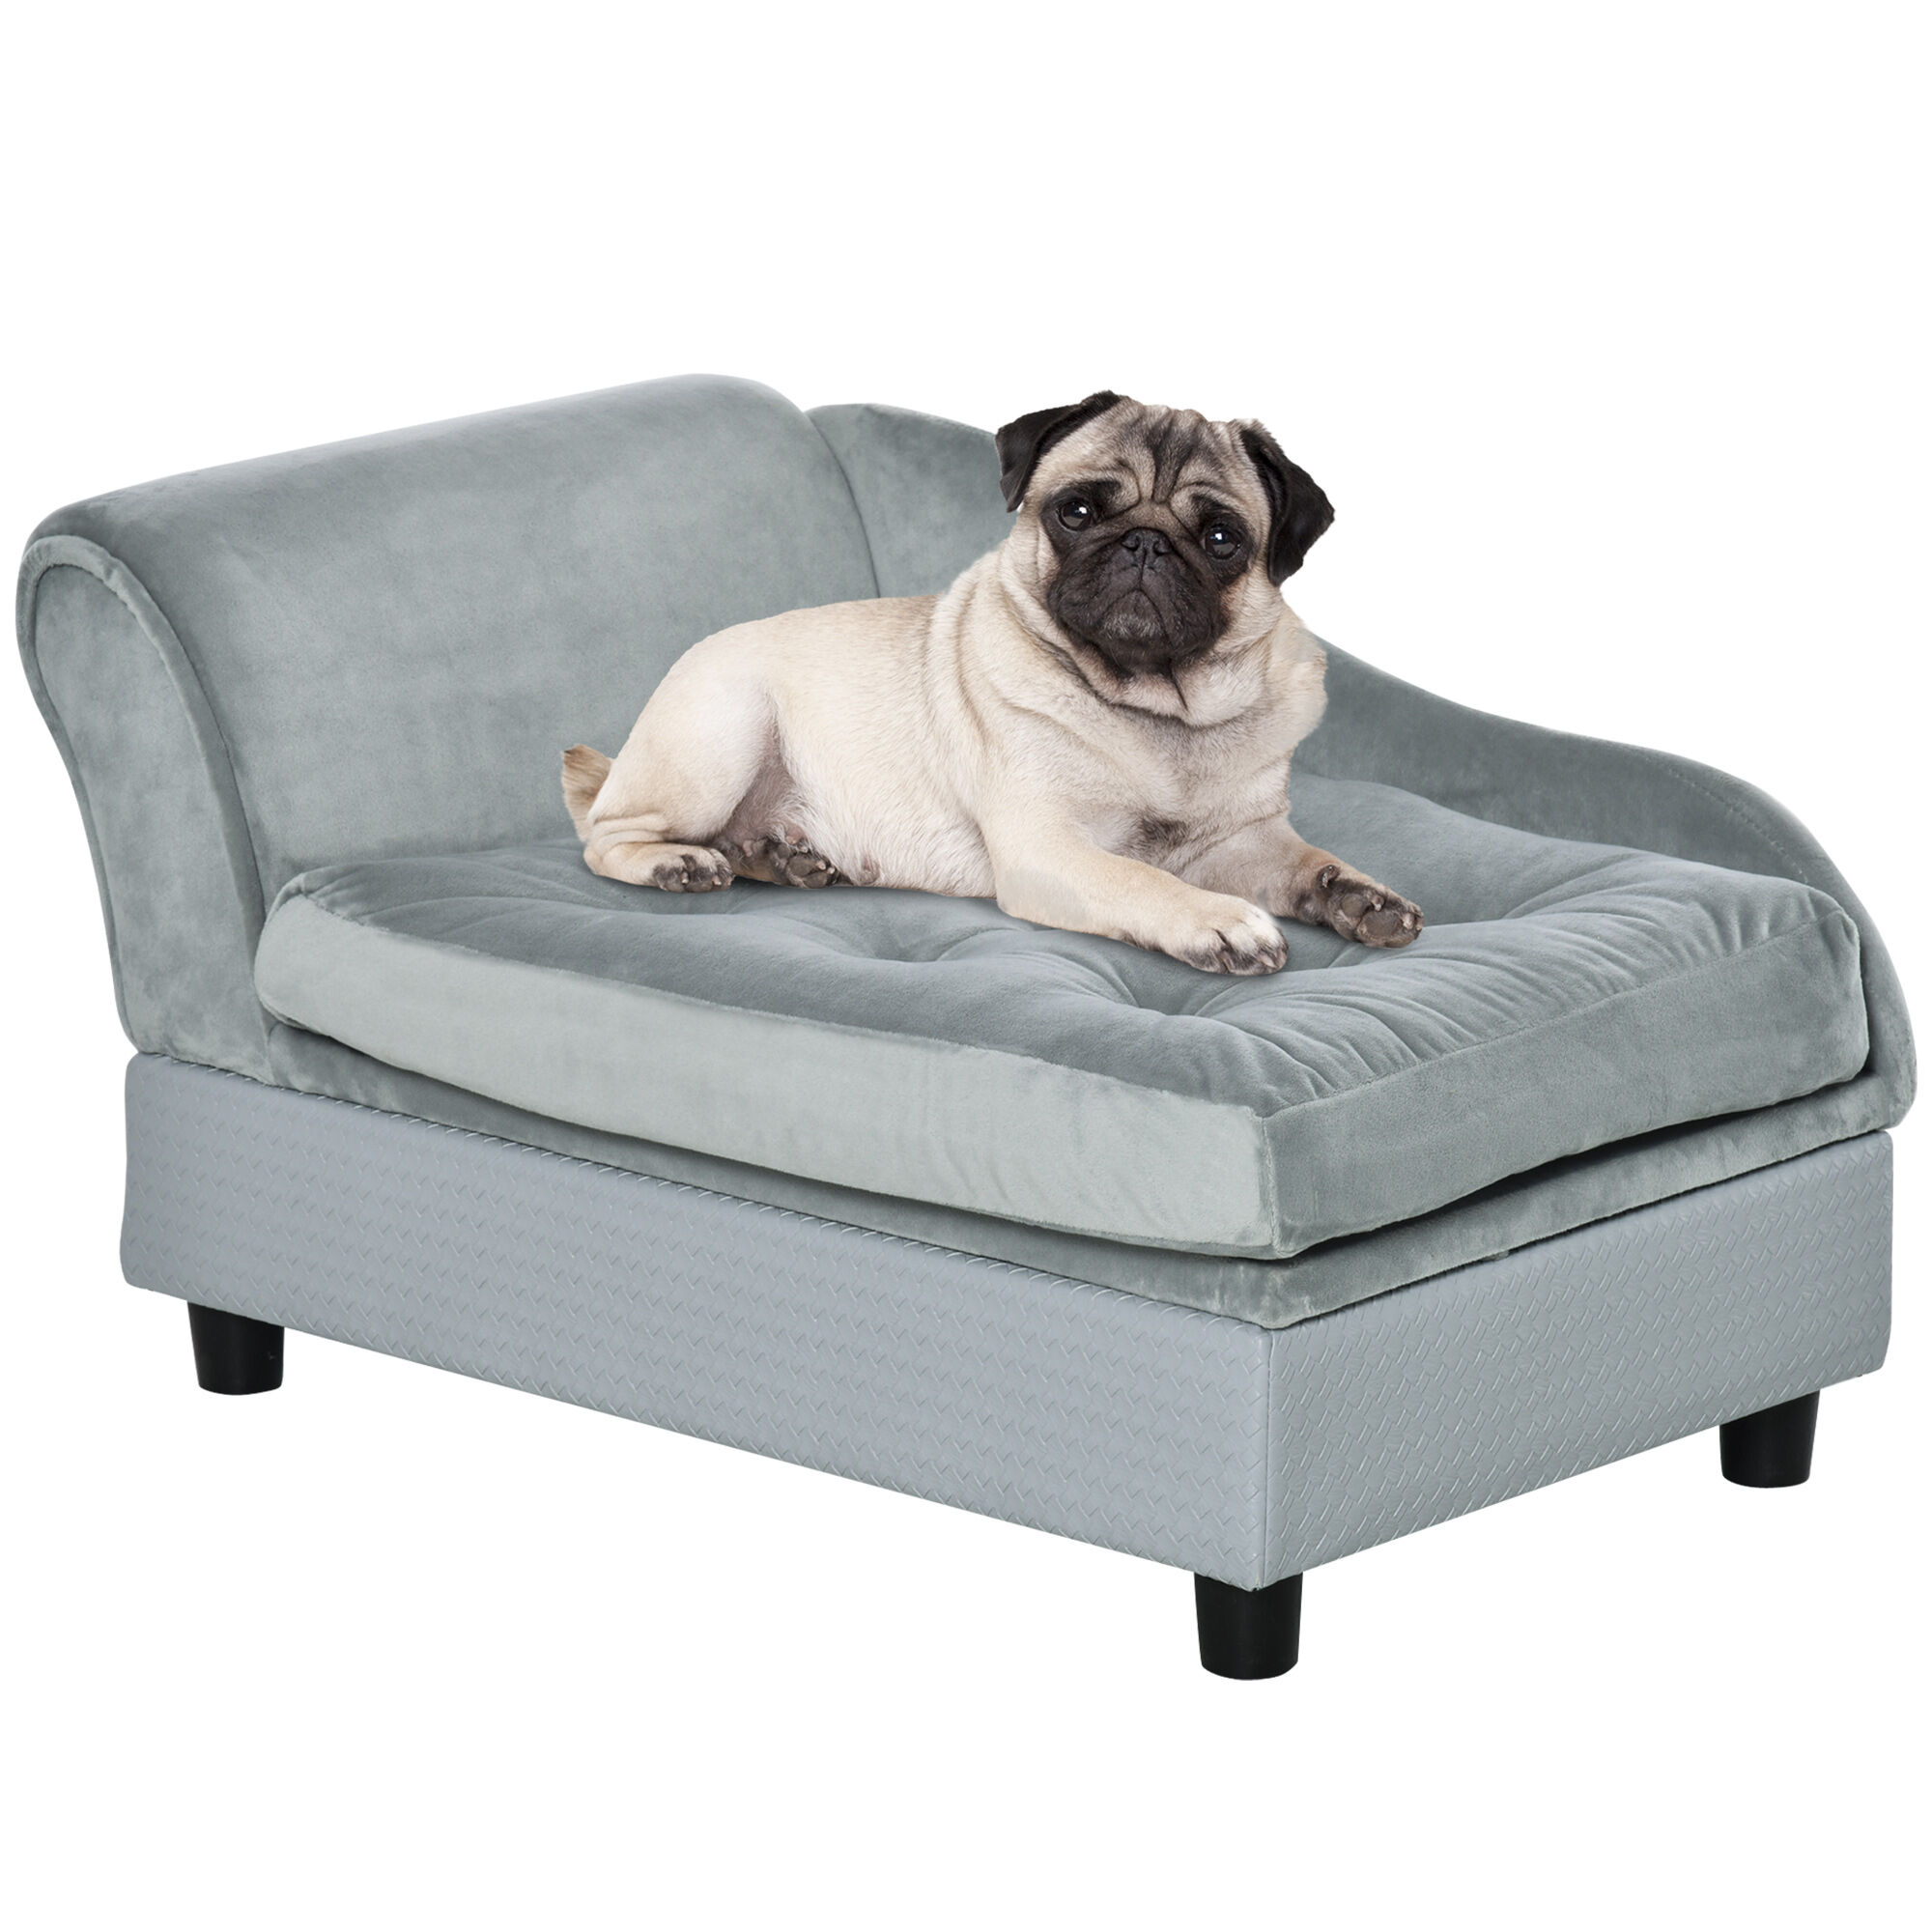 PawHut Plush Dog Sofa Bed for Small Dogs Cats Light Blue with Storage Cushion Comfortable Pet Furniture   Aosom.com